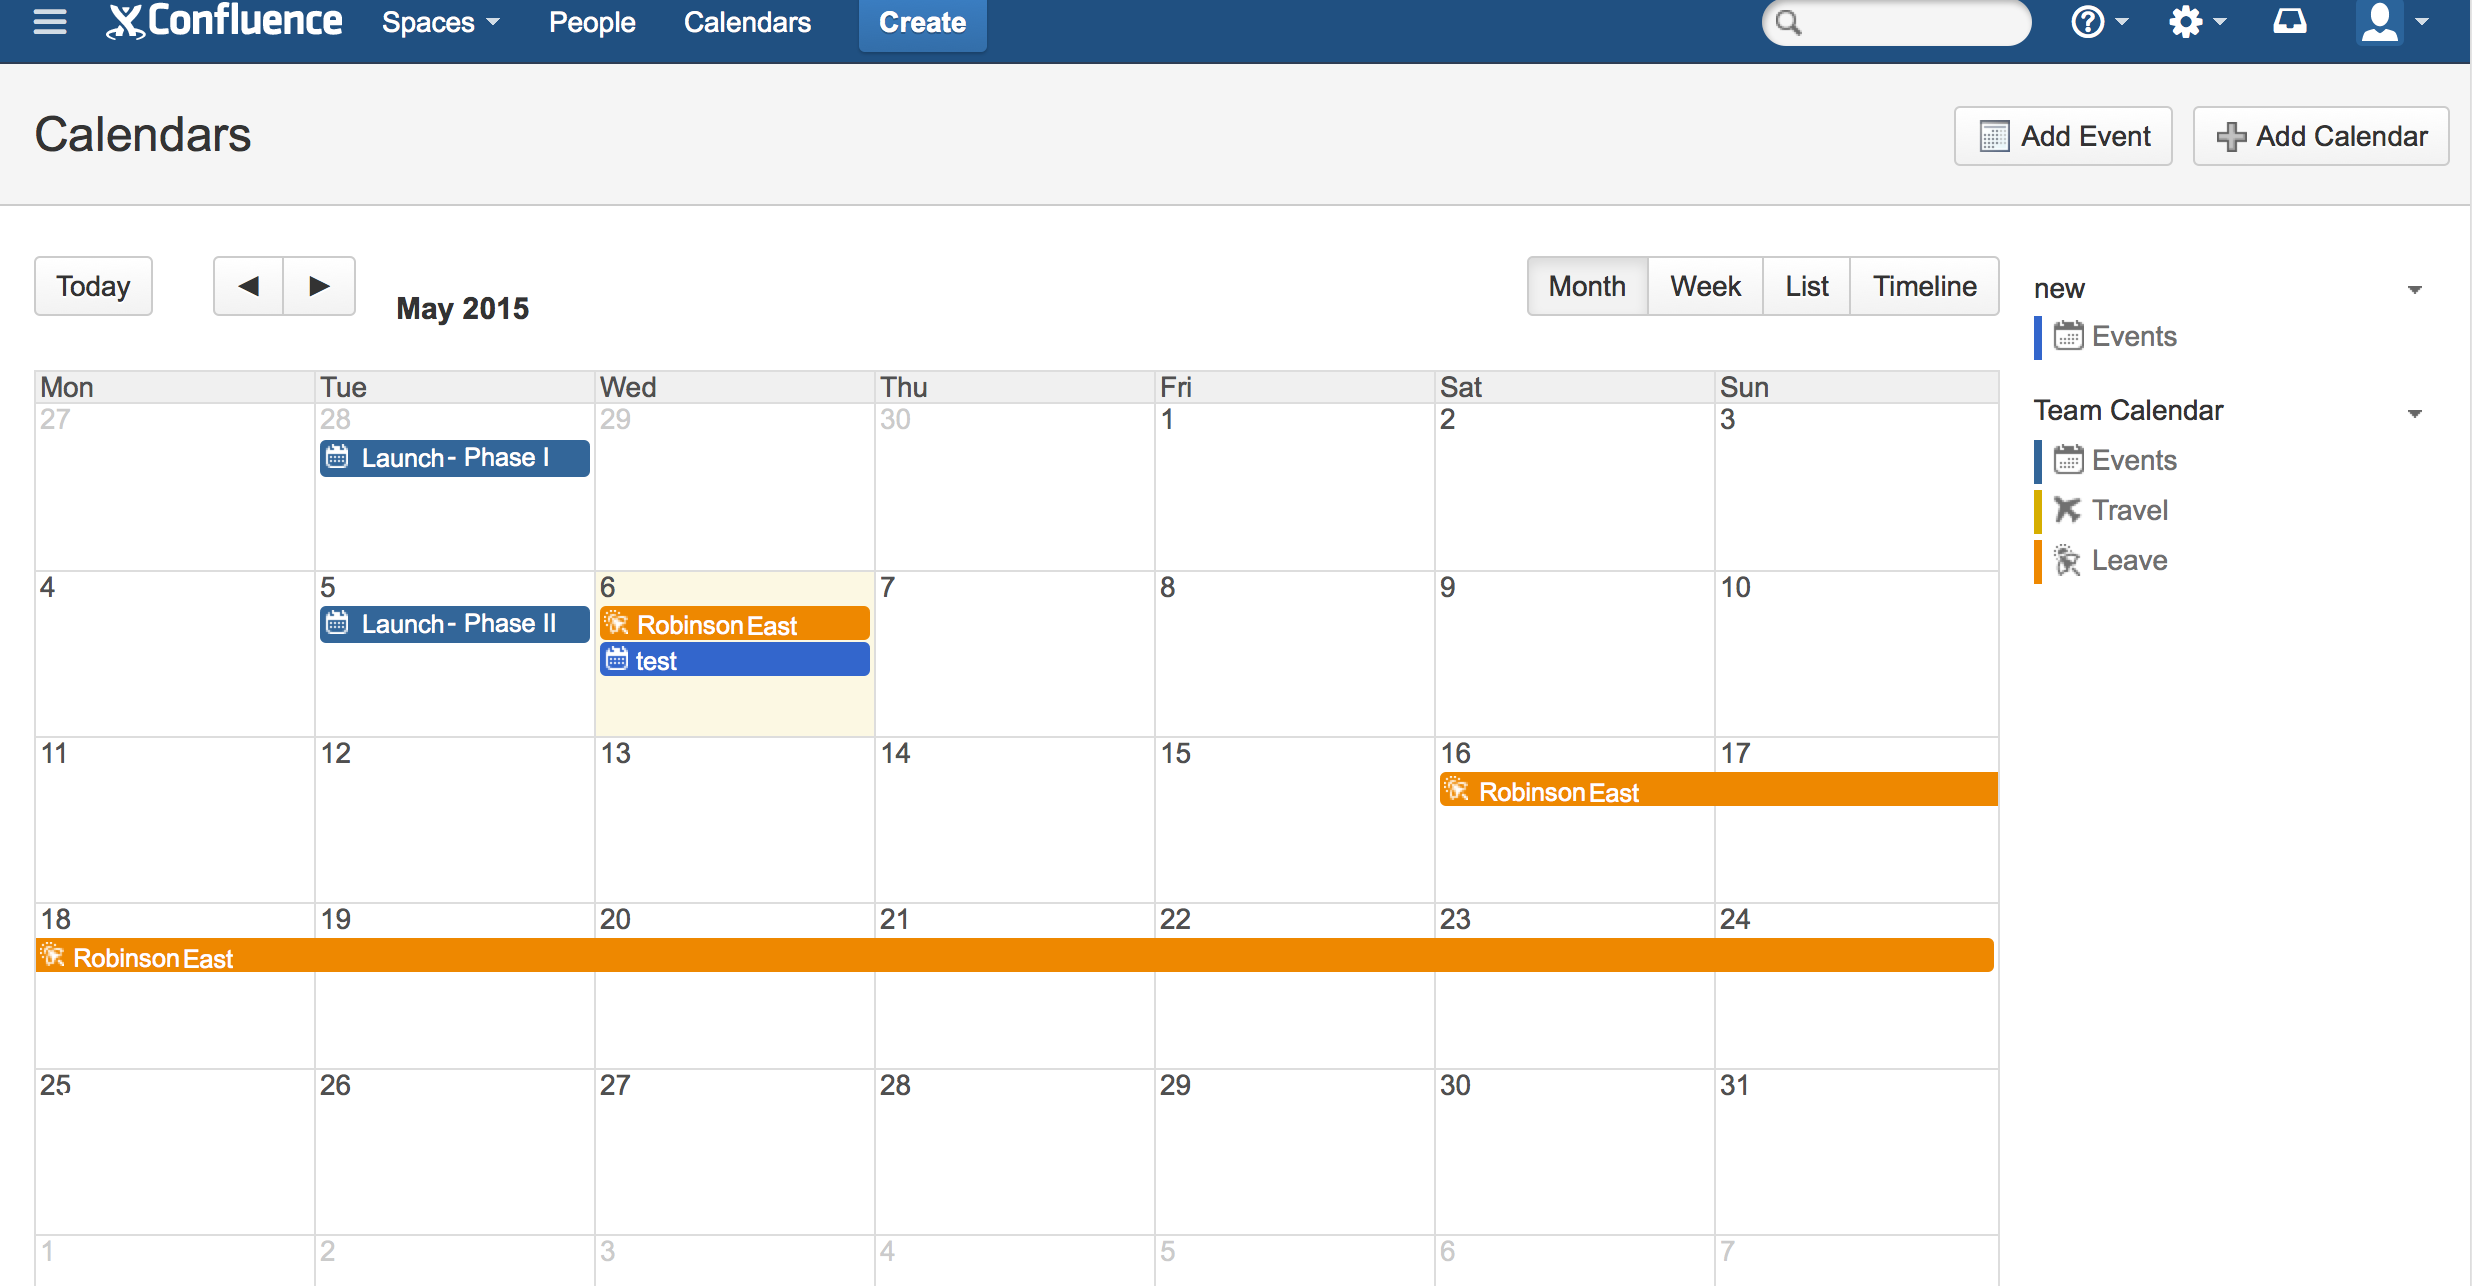 Upgrading Team Calendars for Confluence to 4.2 or above causes events